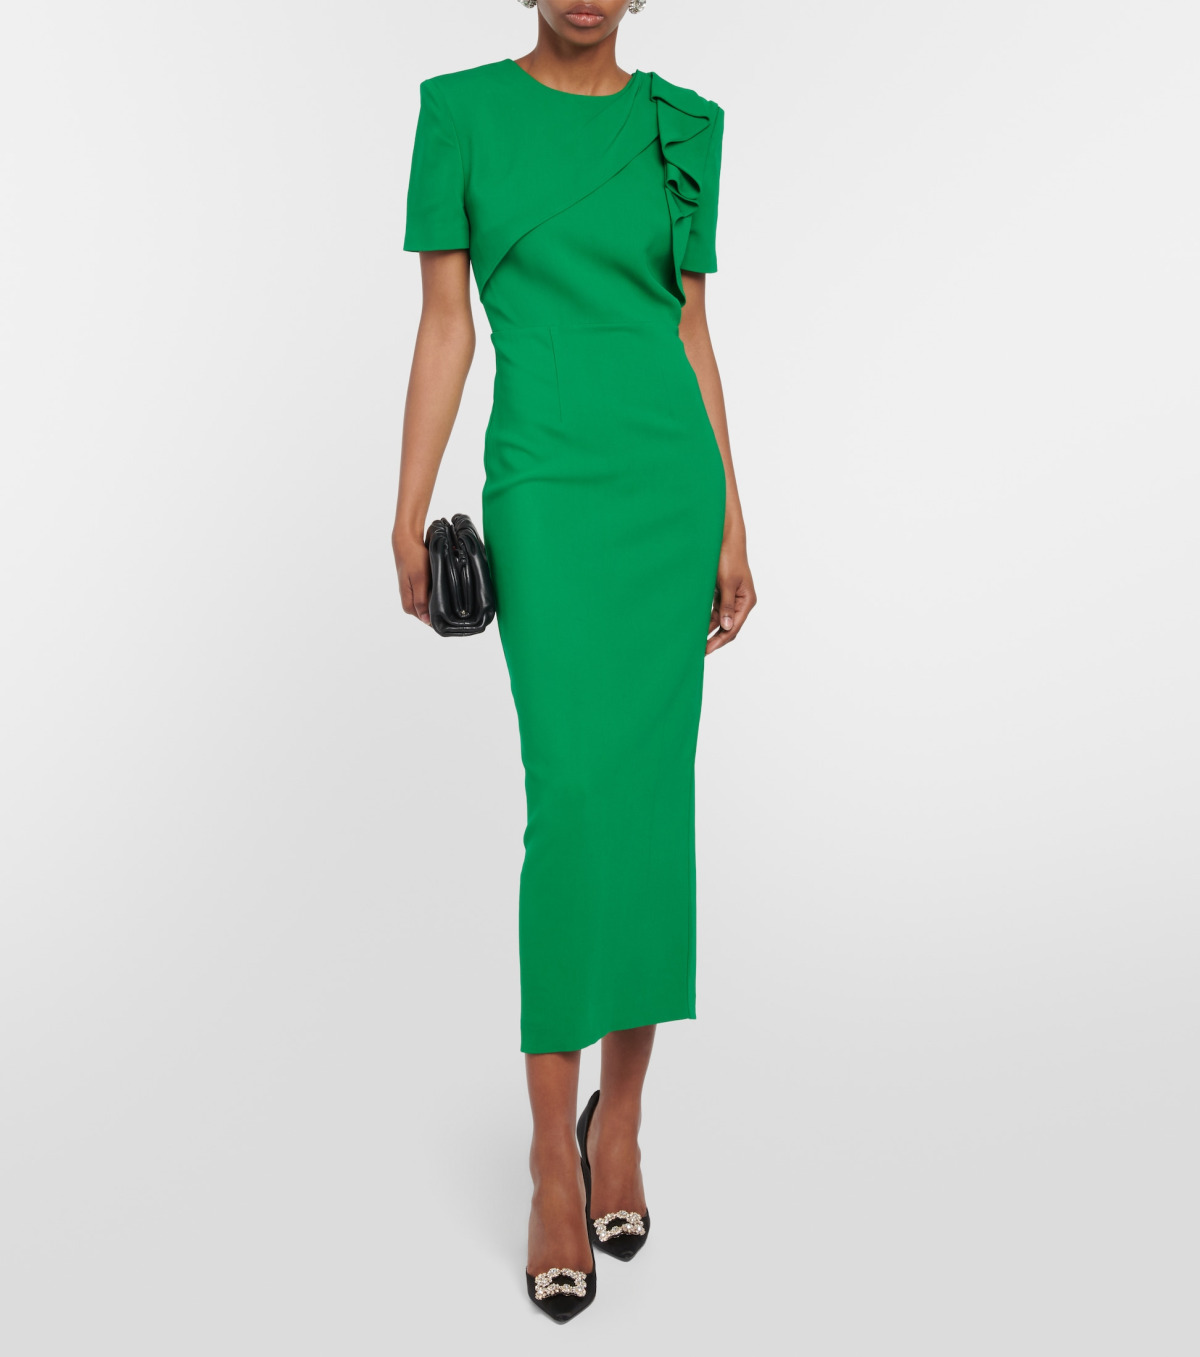 Roland Mouret cady dress in green worn to Wimbledon by Kate Middleton